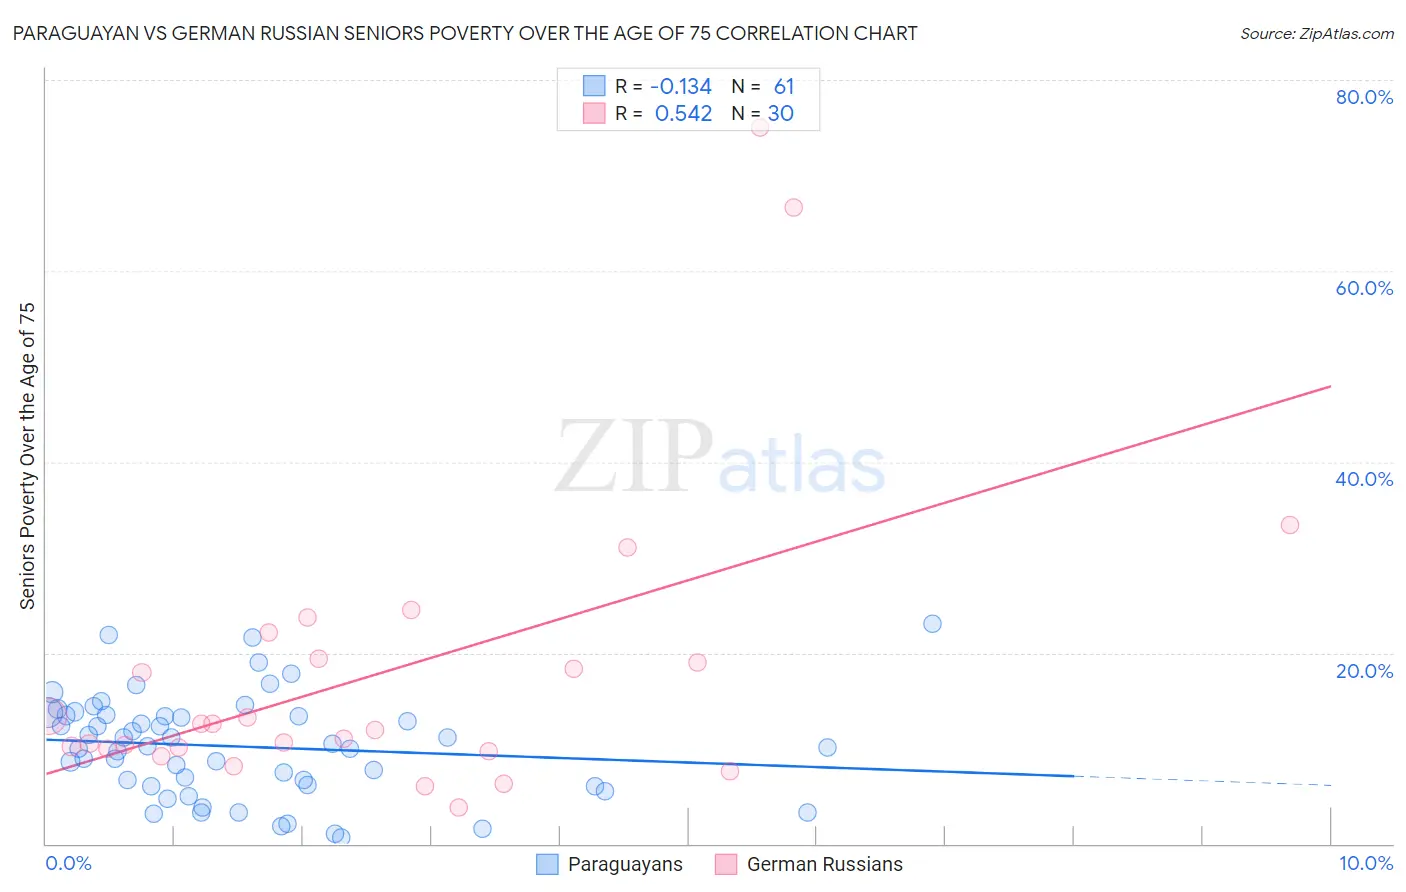 Paraguayan vs German Russian Seniors Poverty Over the Age of 75